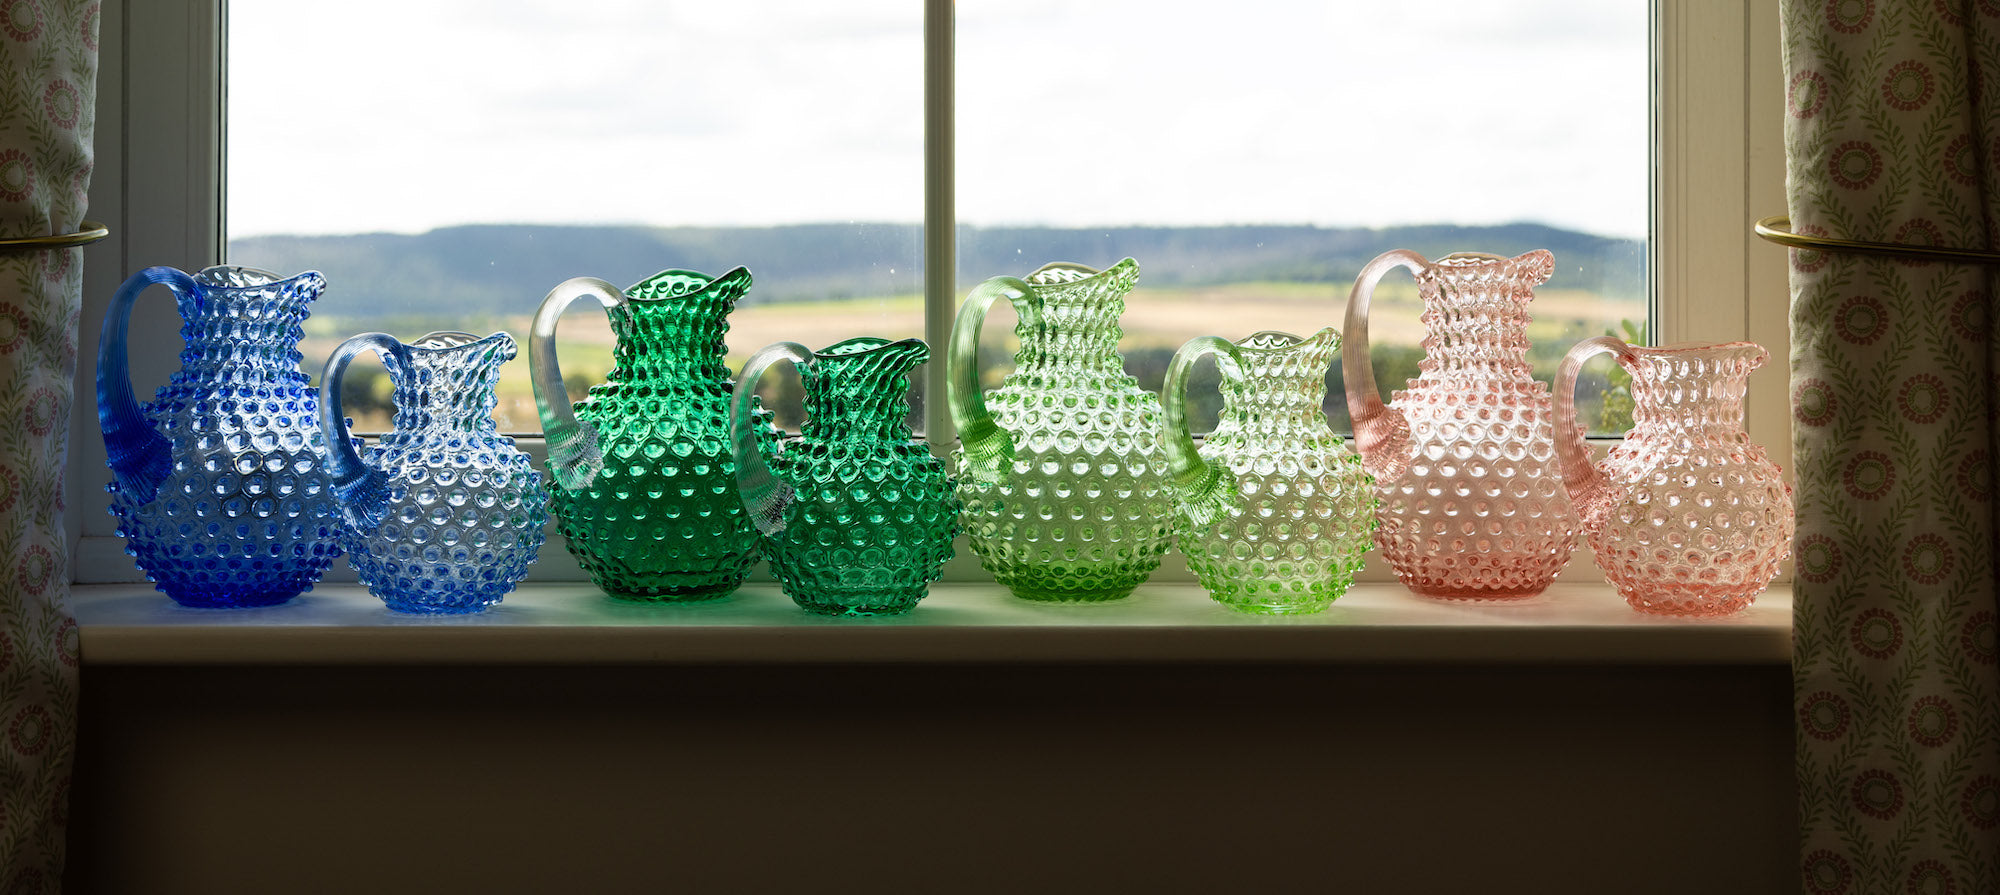 A row of hobnail jugs in two sizes